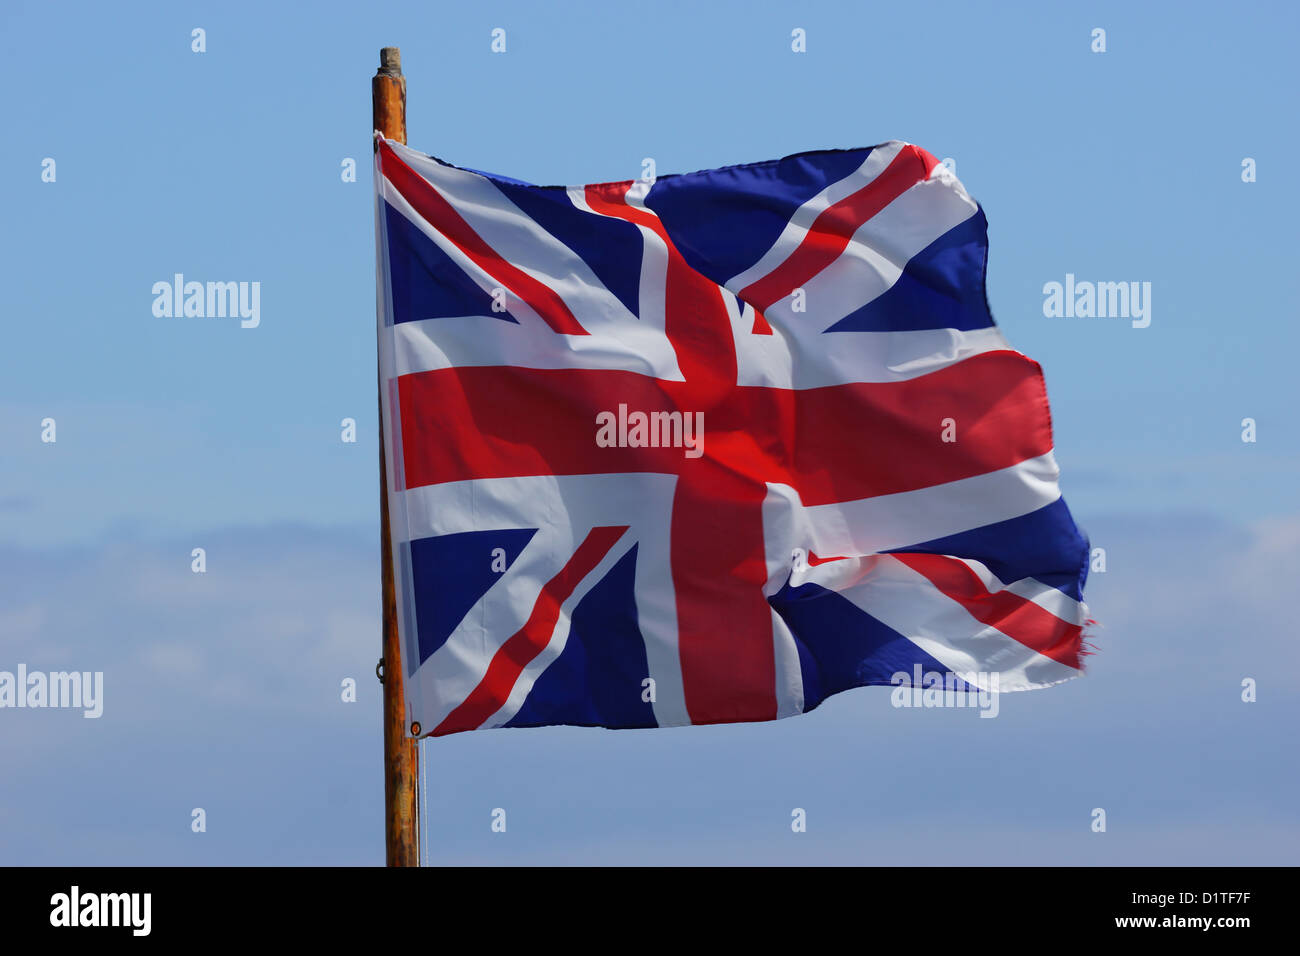 British Flag / Union Jack blowing in the wind against a blue sky Stock Photo